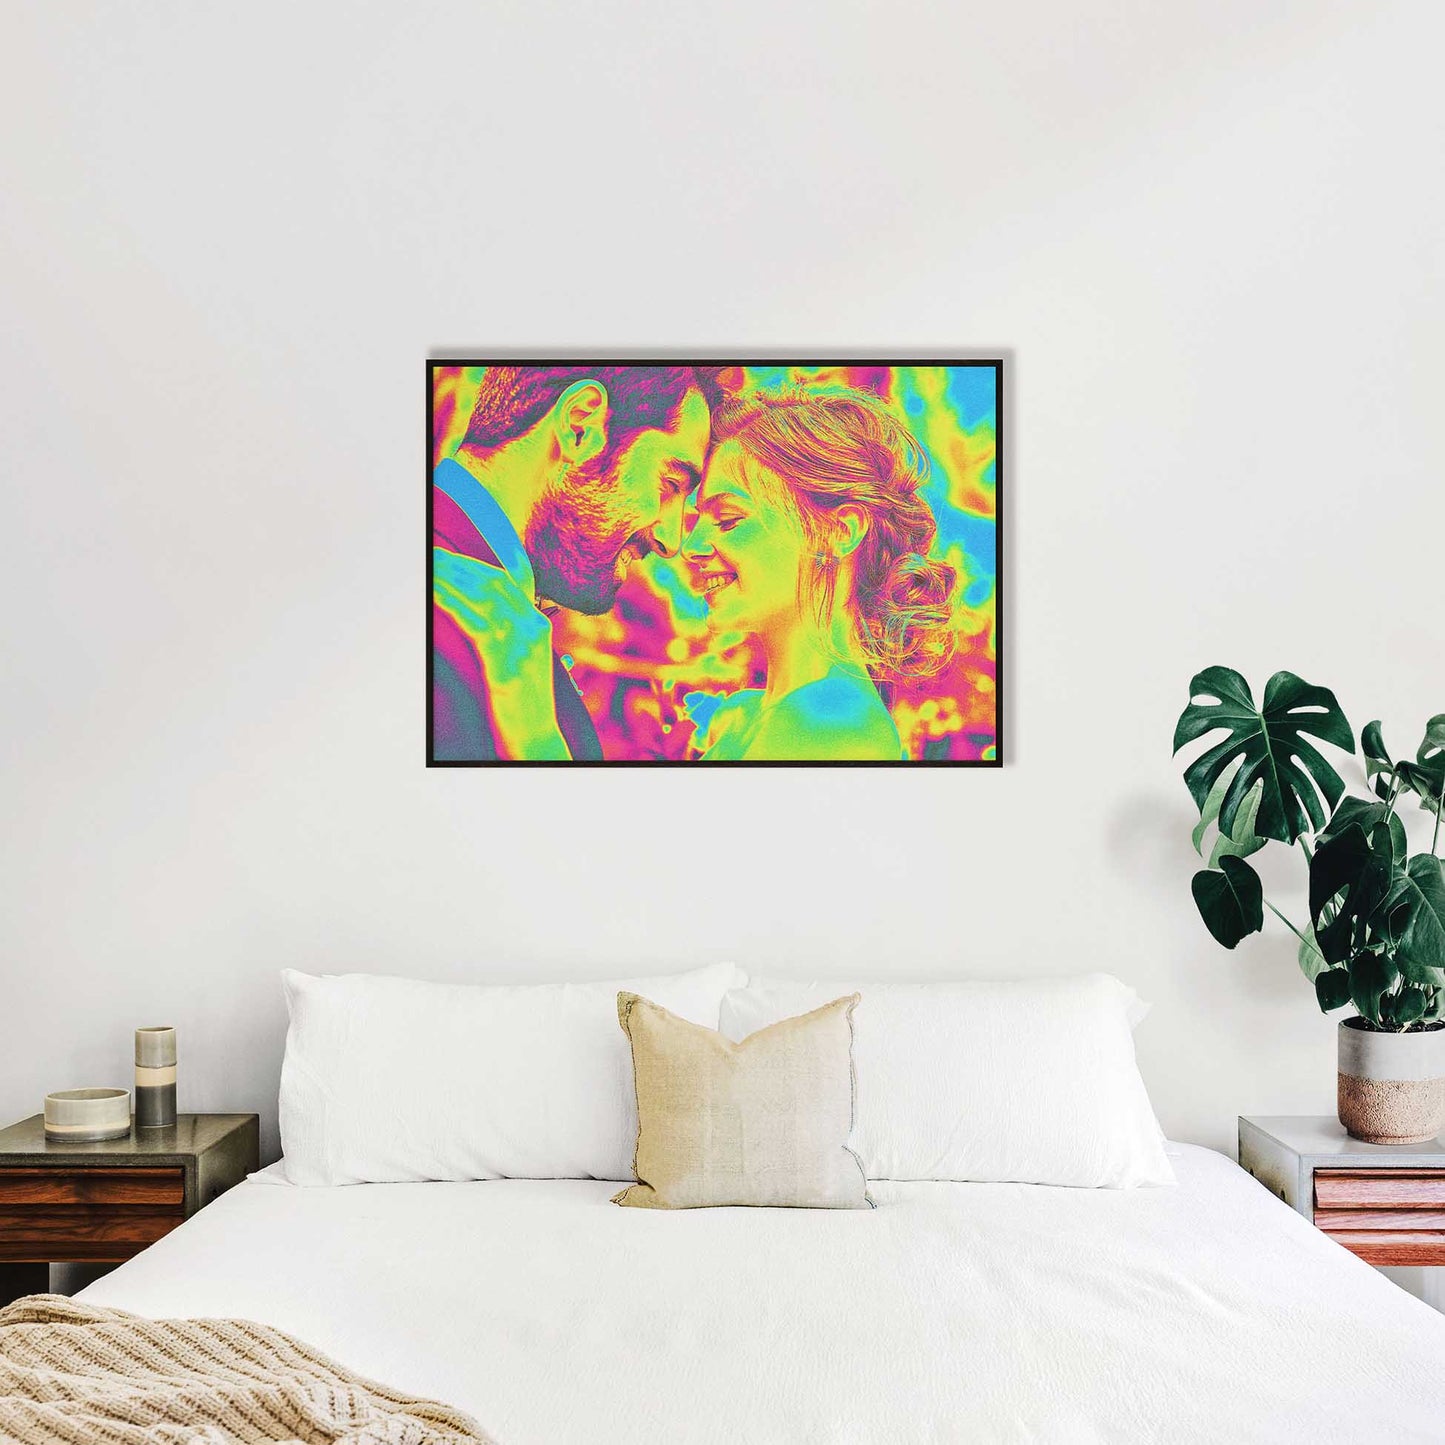 Elevate your home decor with the captivating Personalised Acid Trip Framed Print. This fine digital art piece features a colorful and vivid design that makes a bold statement. Printed from your photo, it showcases sharp and vibrant print